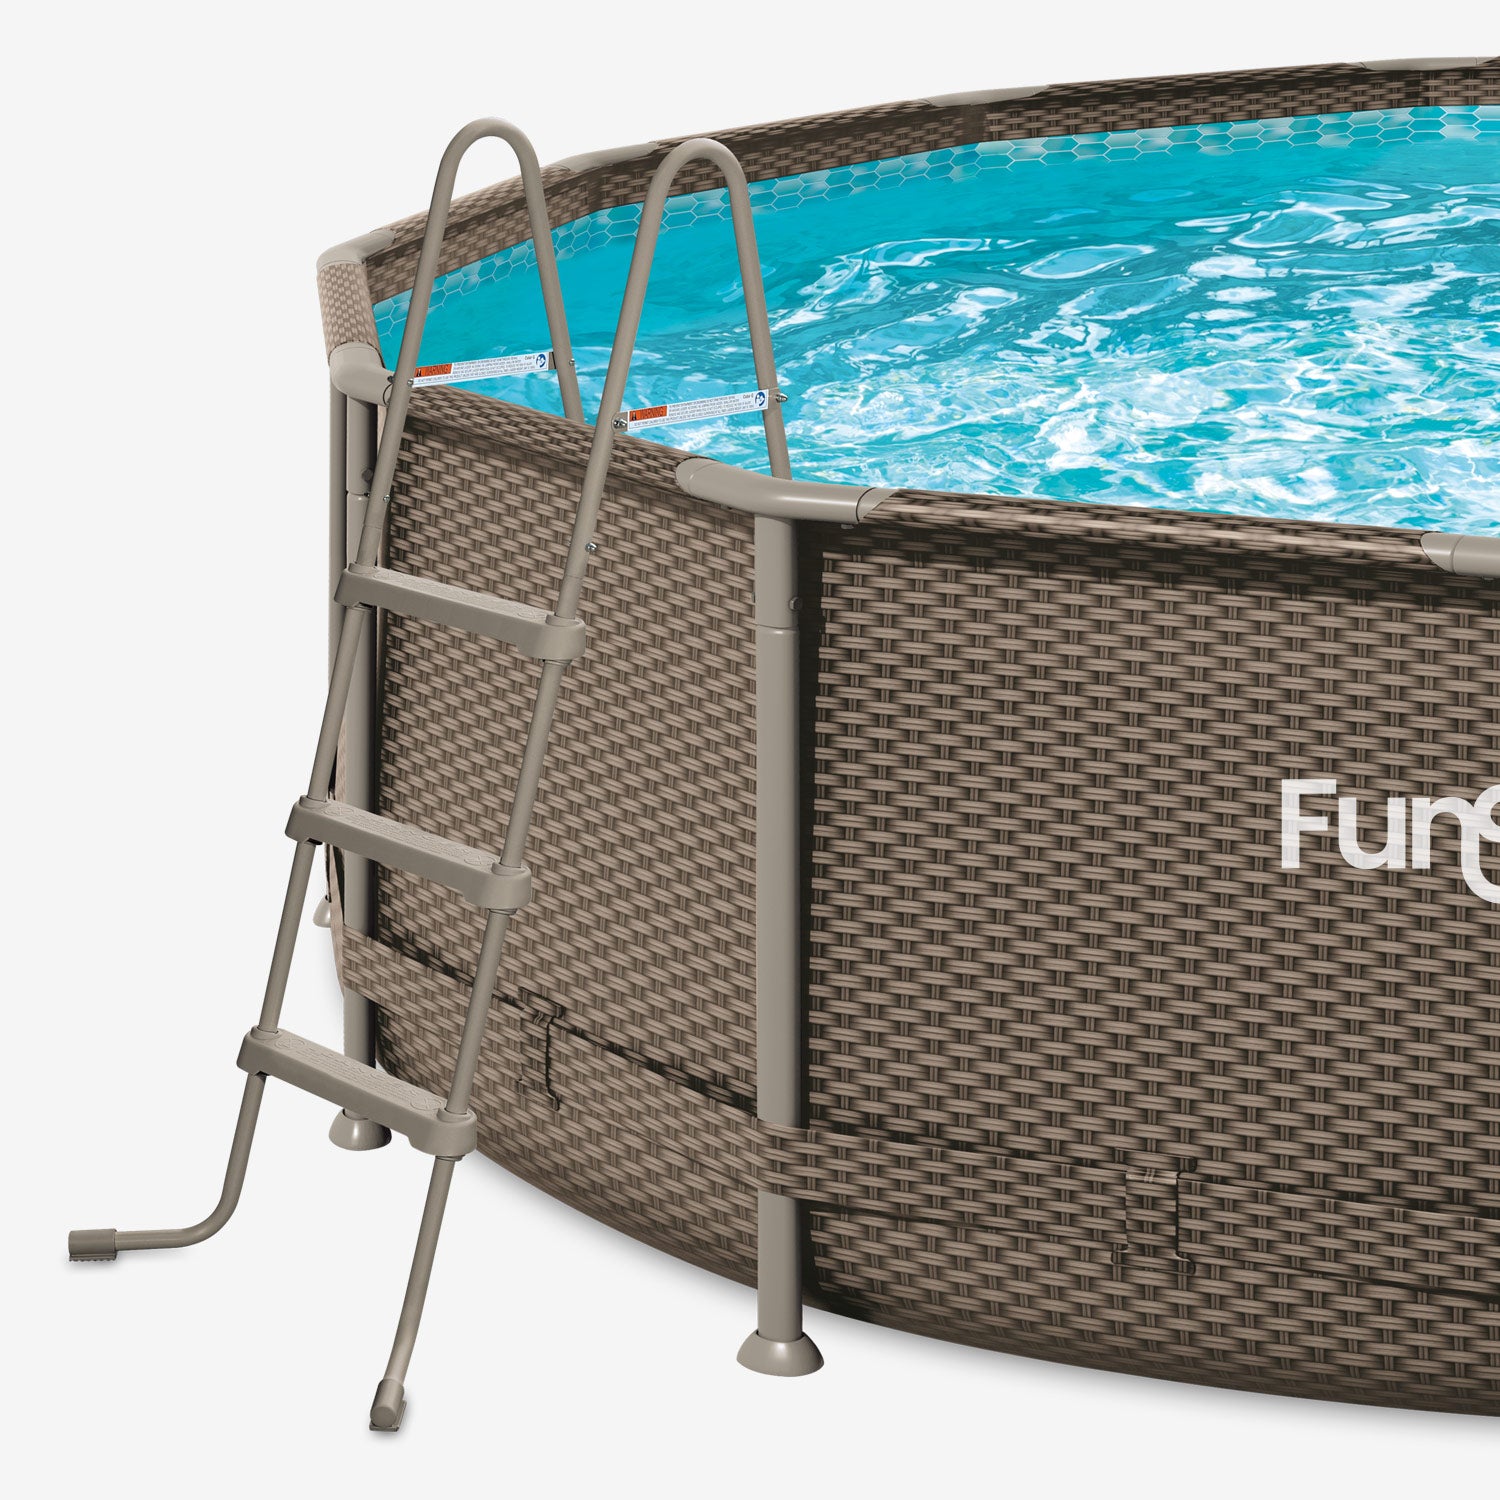 Funsicle 42" SureStep Ladder with. Funsicle Oasis Designer Pool